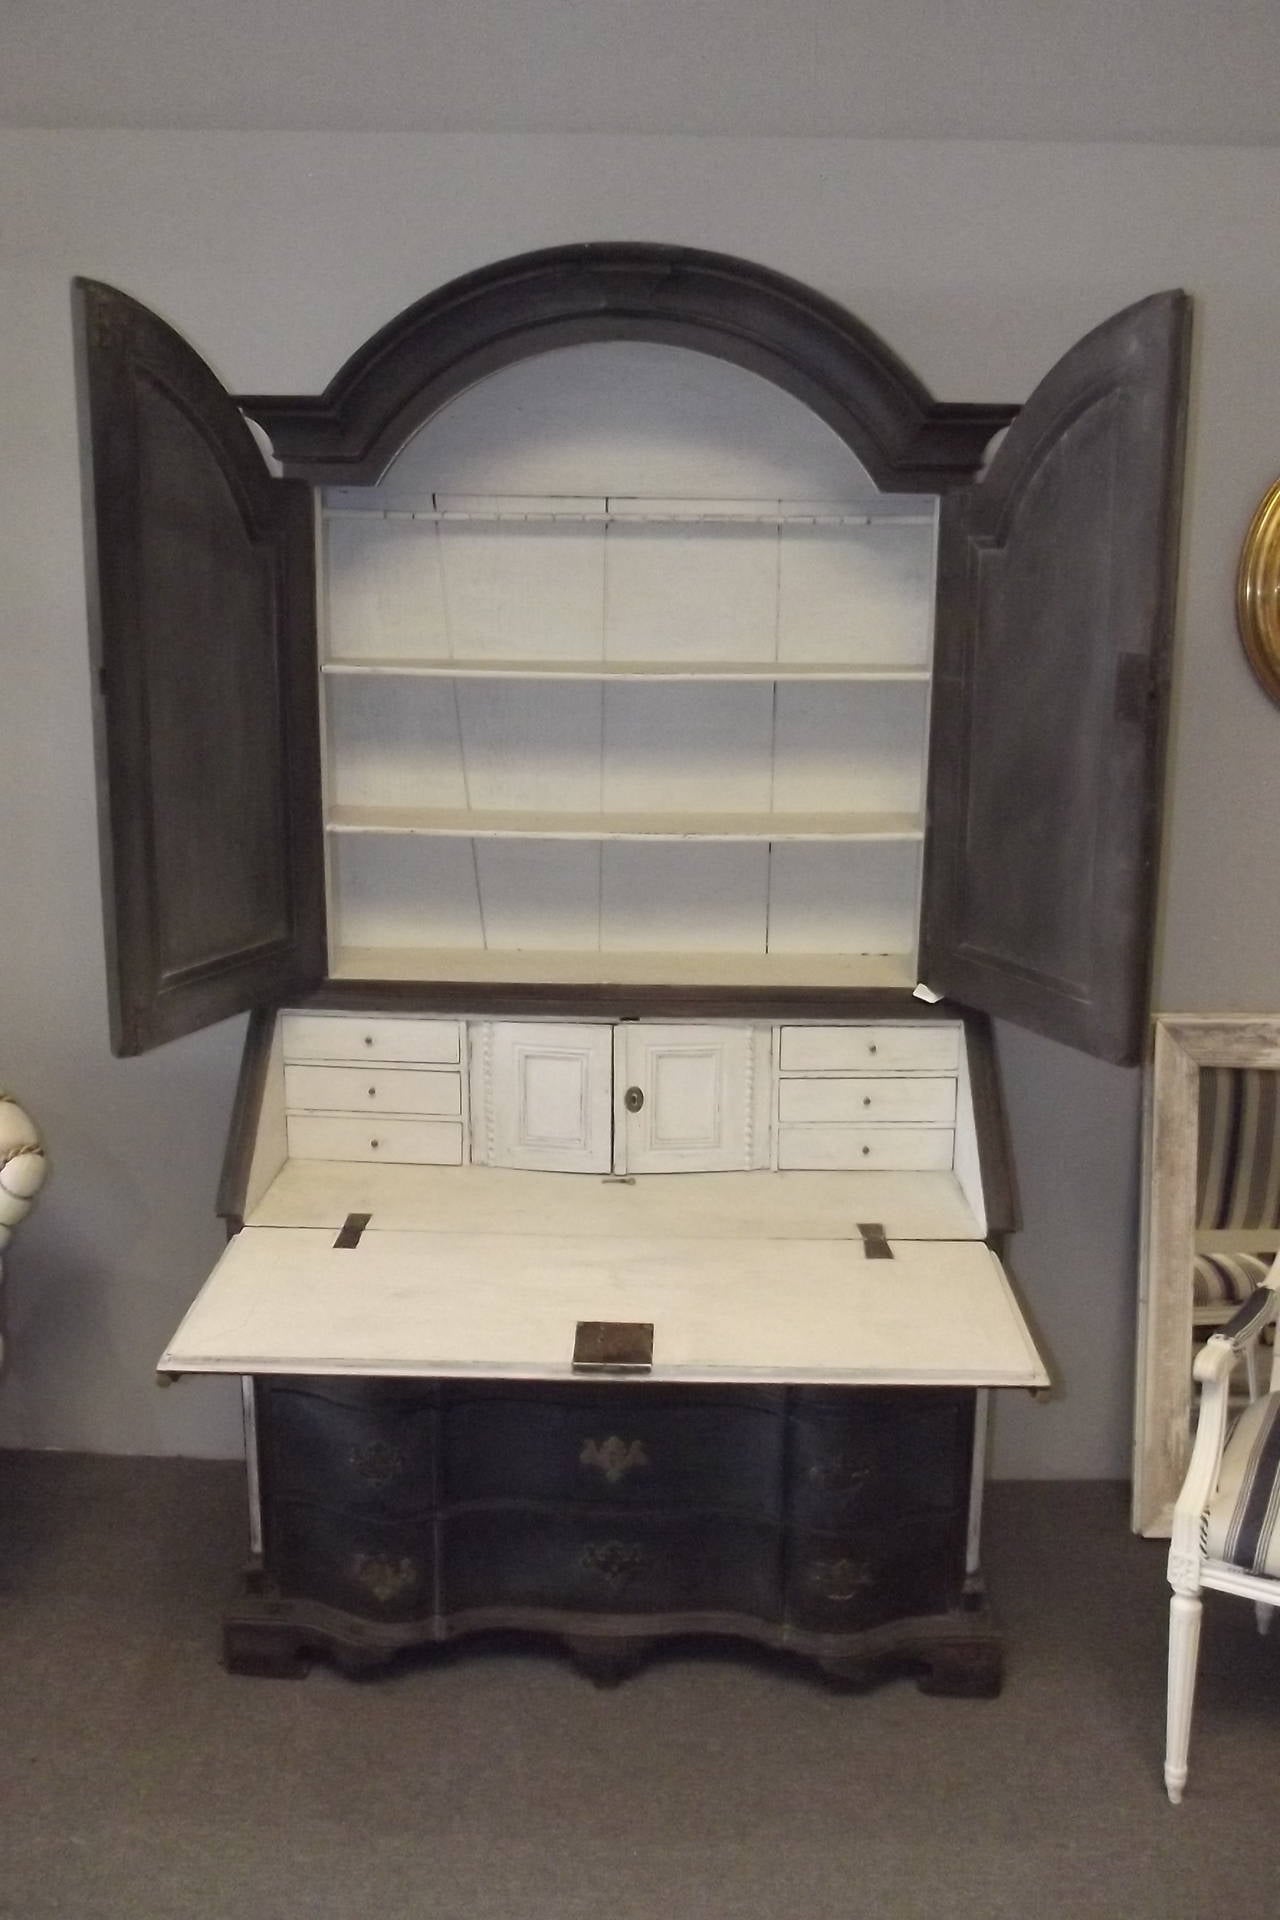 A Swedish Rococo period secretary desk dating from the middle of the 18th century with with exceptional detailing throughout including a detailed interior, serpentine drawer case, bracket feet quarter columns with brass capitals and bases, and bold